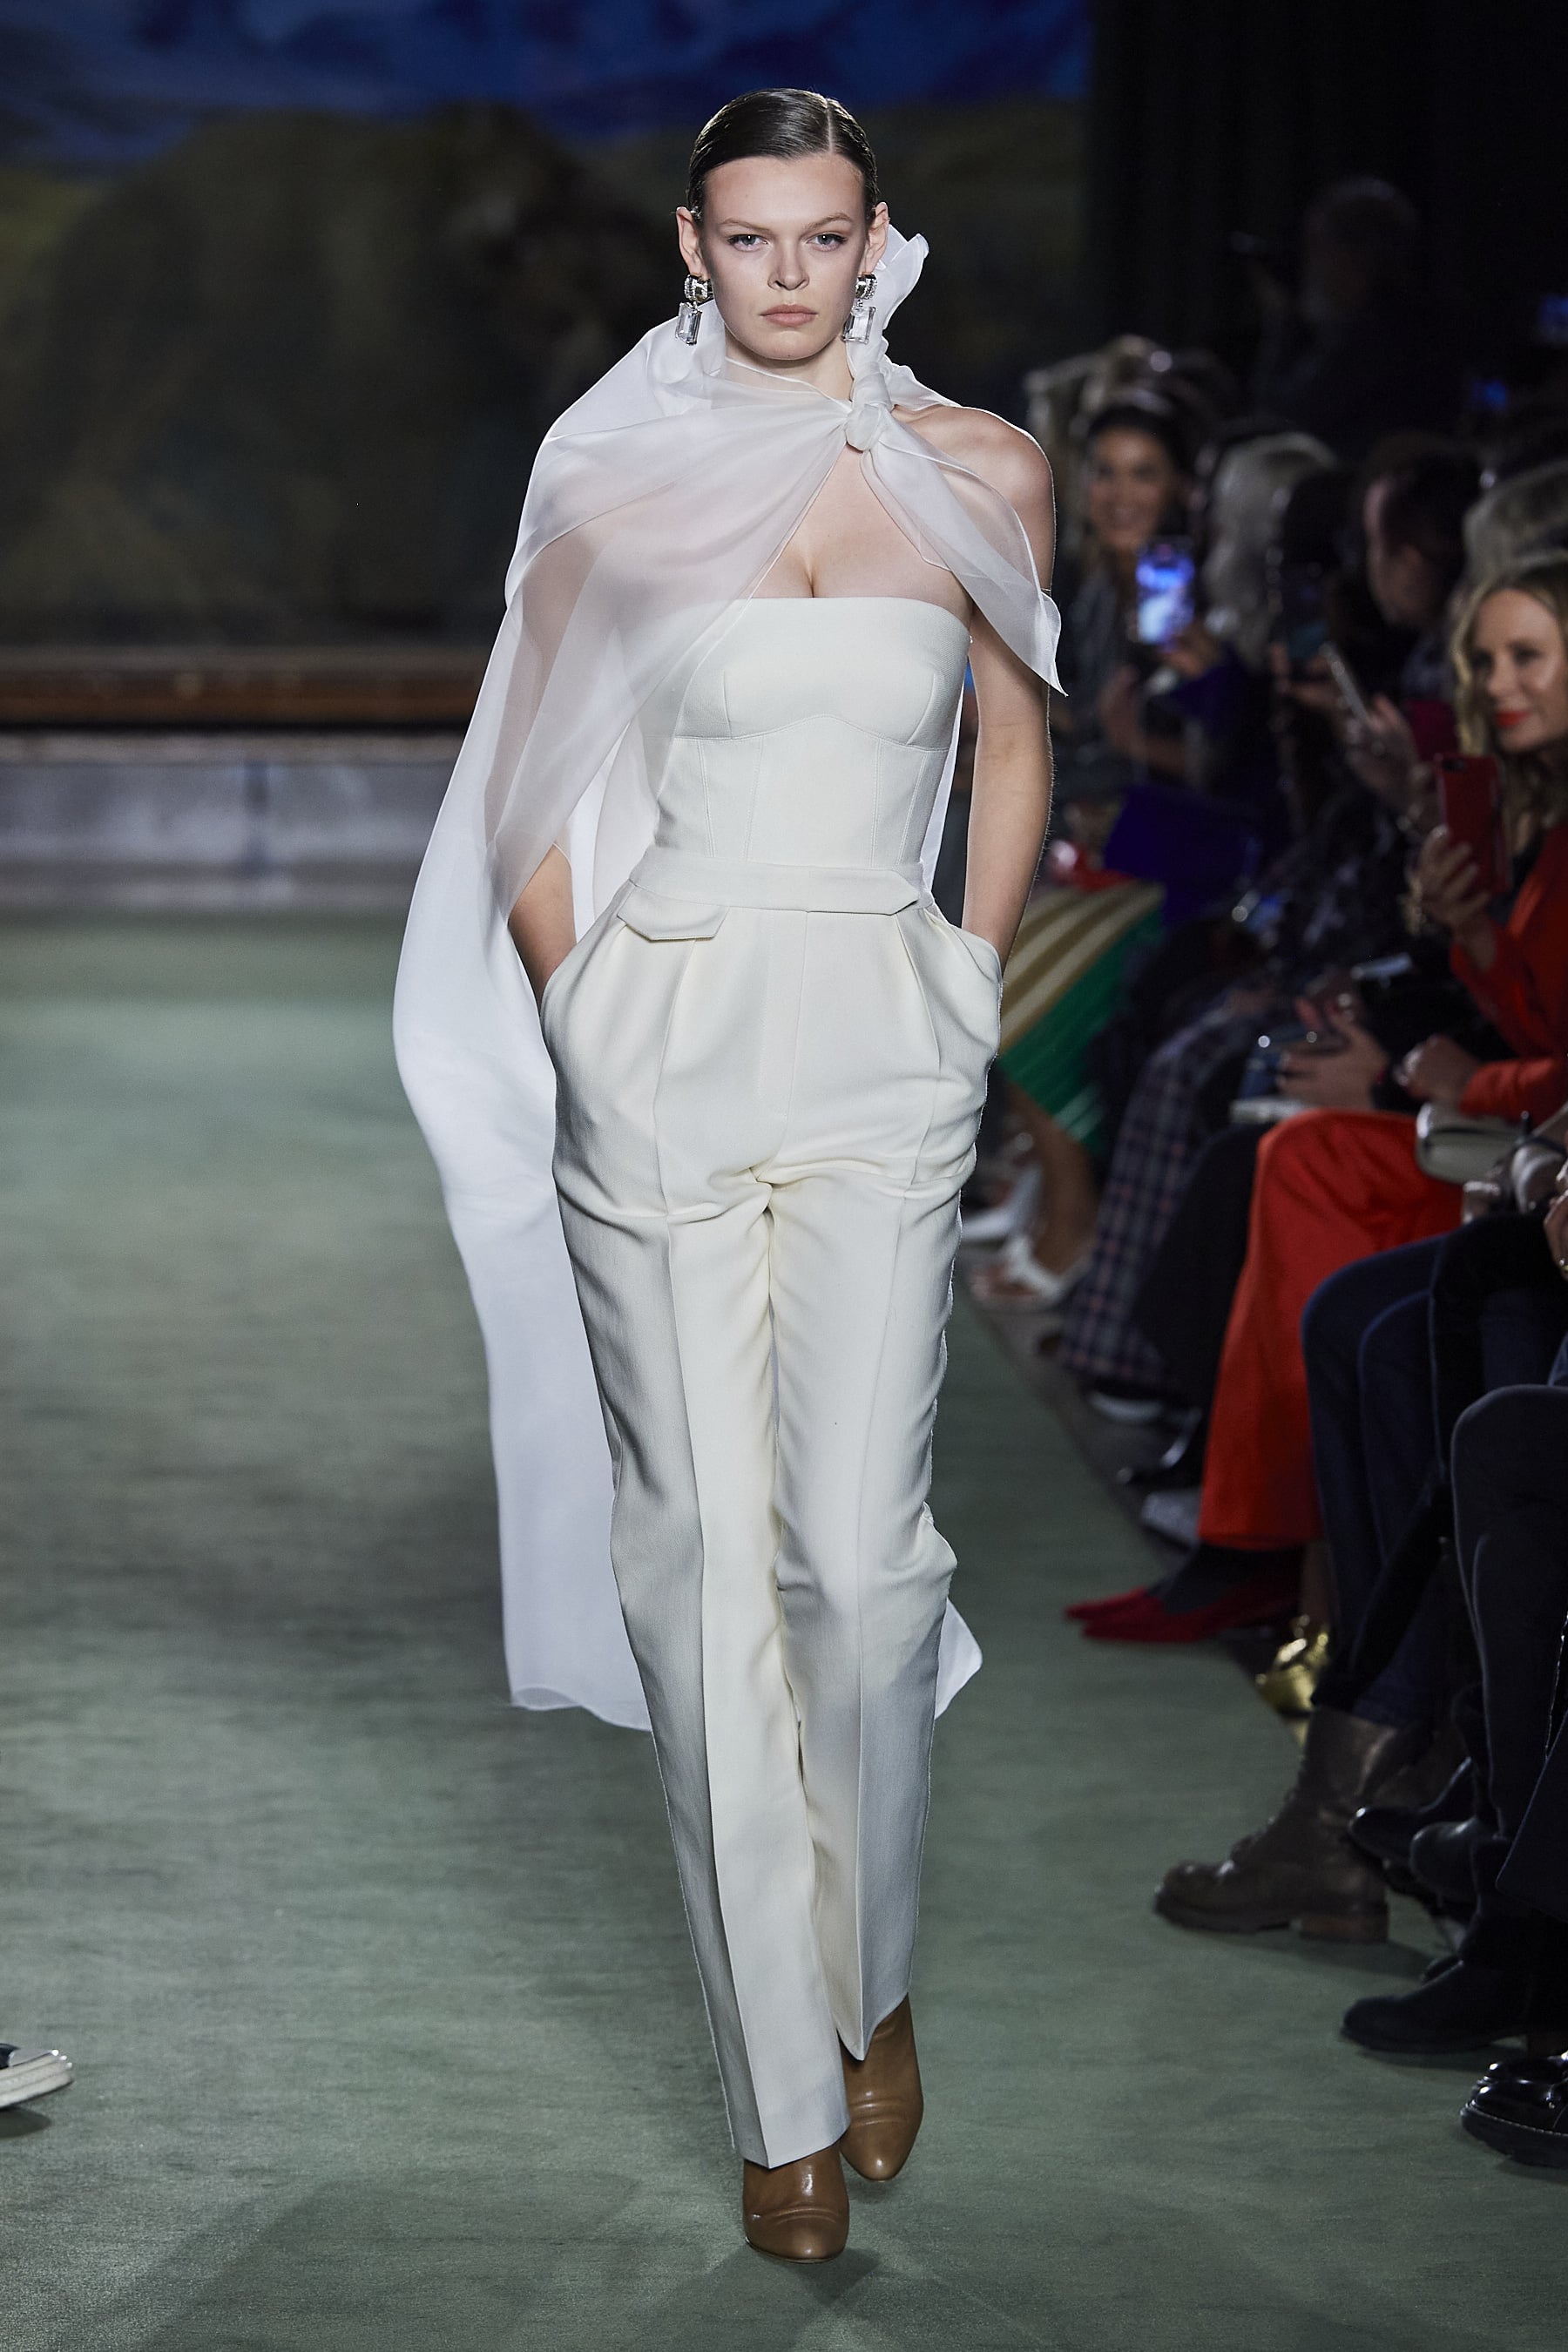 Brandon Maxwell Fall Winter 2020 Collection, I Wasn't Ready for the  Glamour (and Navarro Cheering) at Brandon Maxwell's Fall 2020 Runway Show